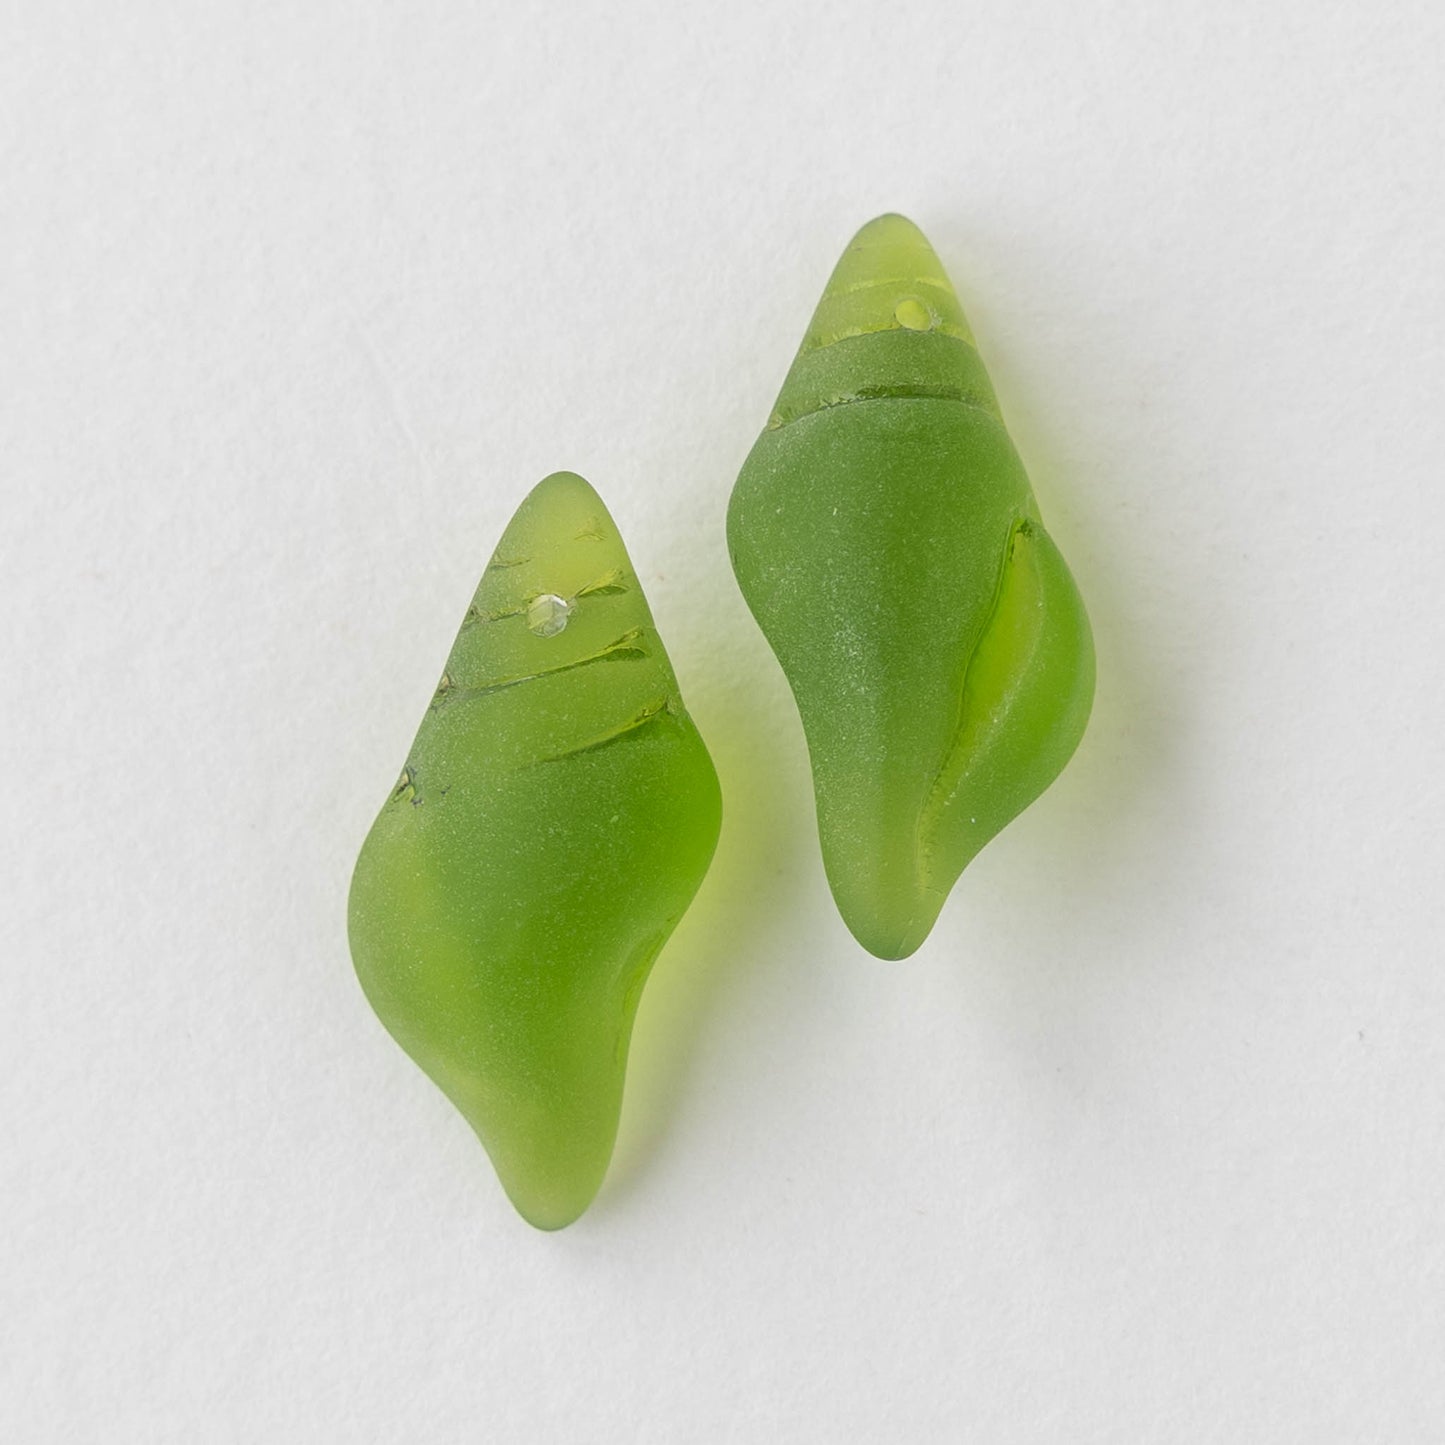 12x26mm Frosted Glass Conch Shell Beads - Olive - 2 Beads